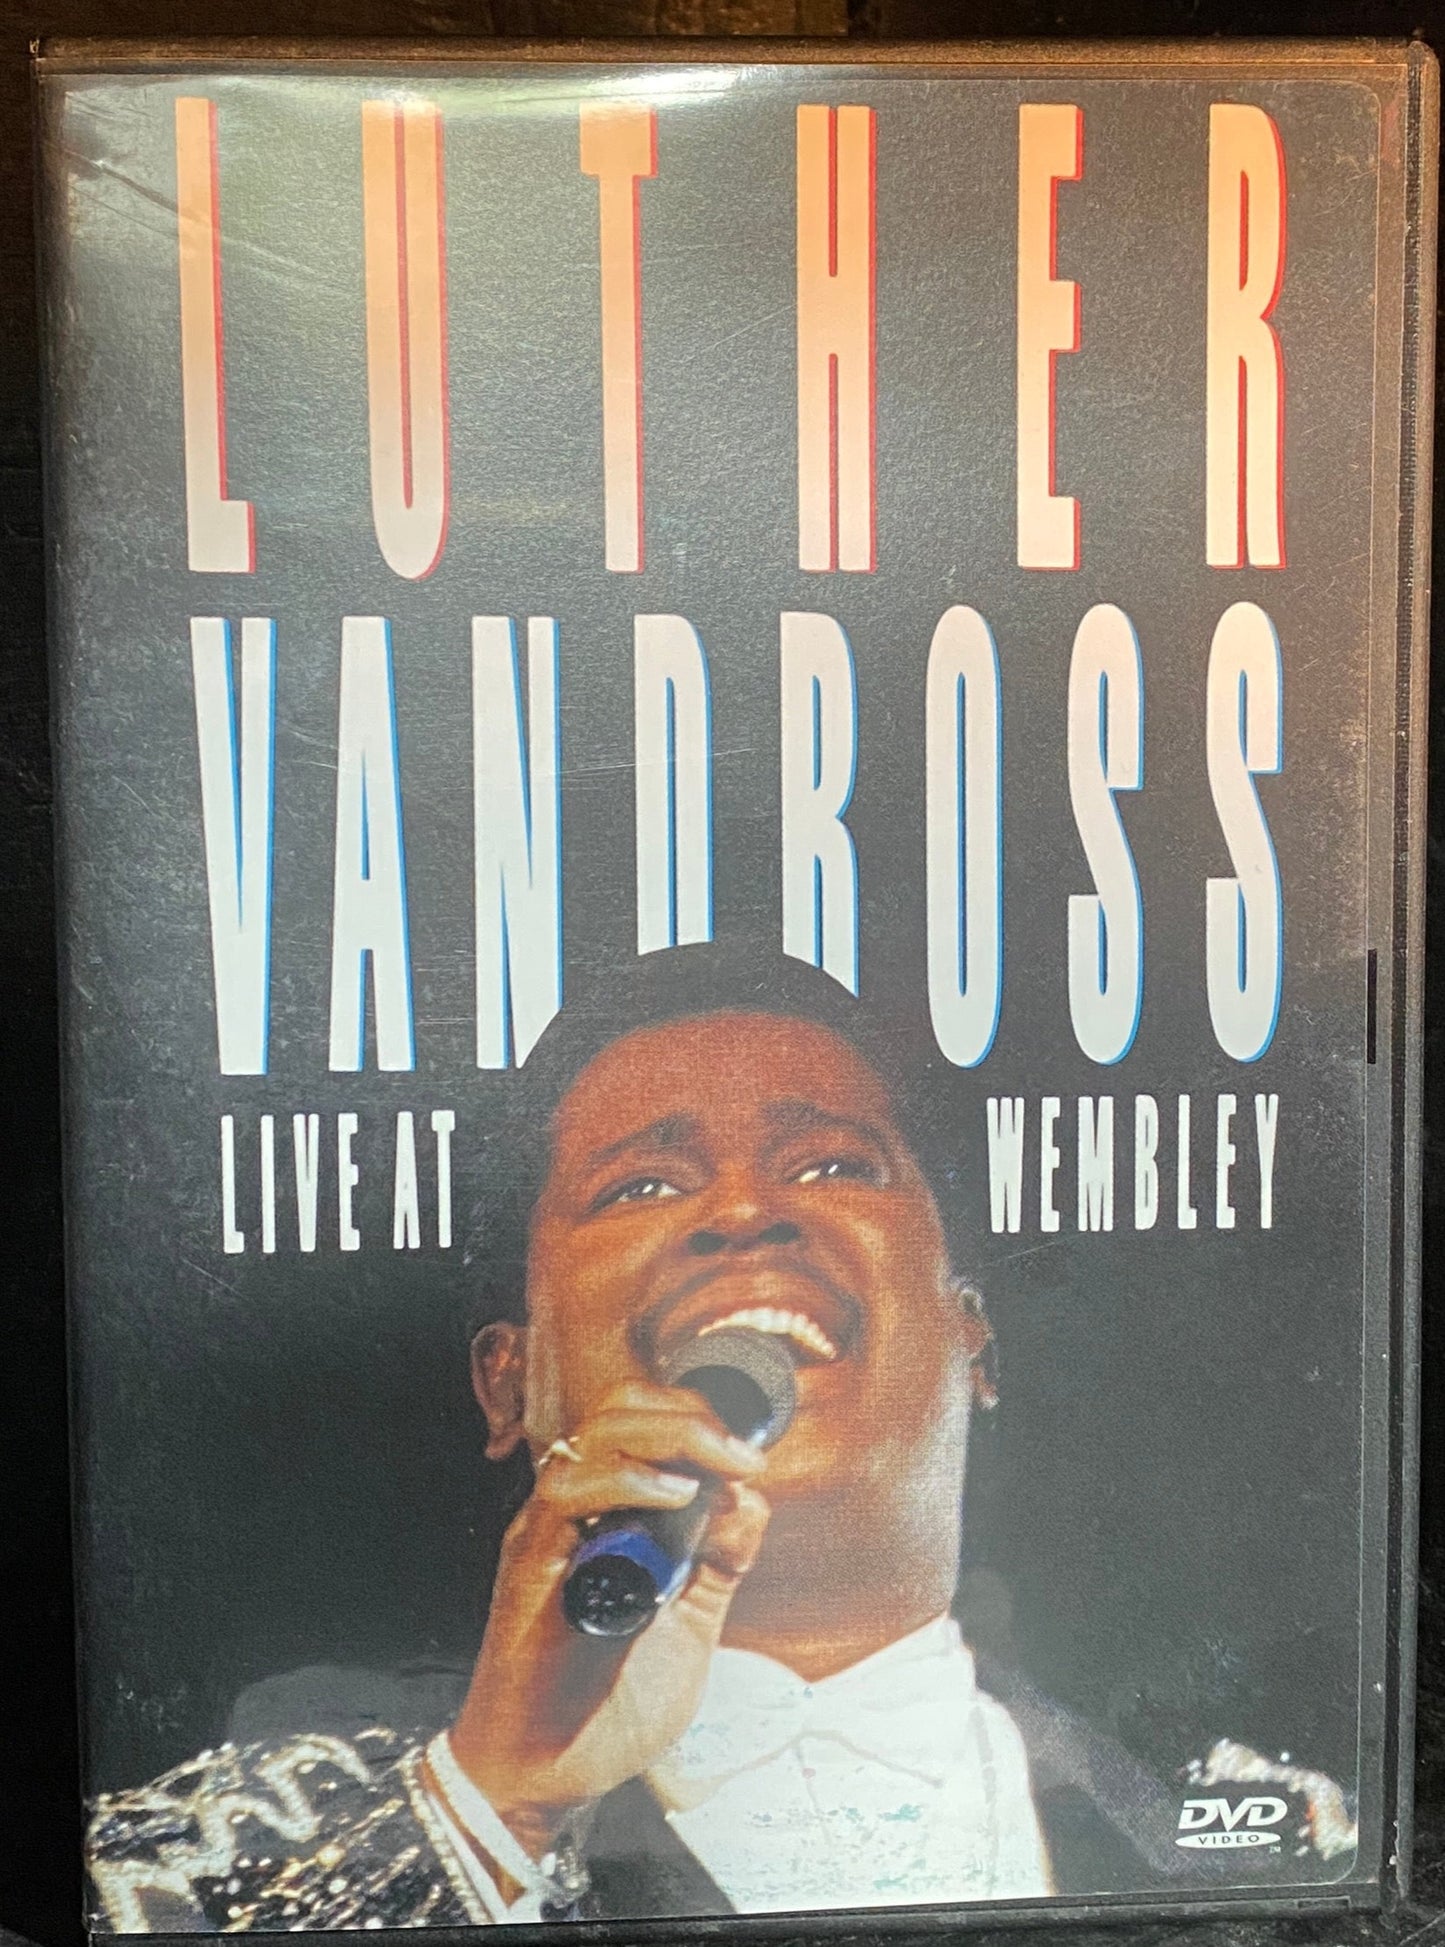 Luther Vandross- Live At Wembley